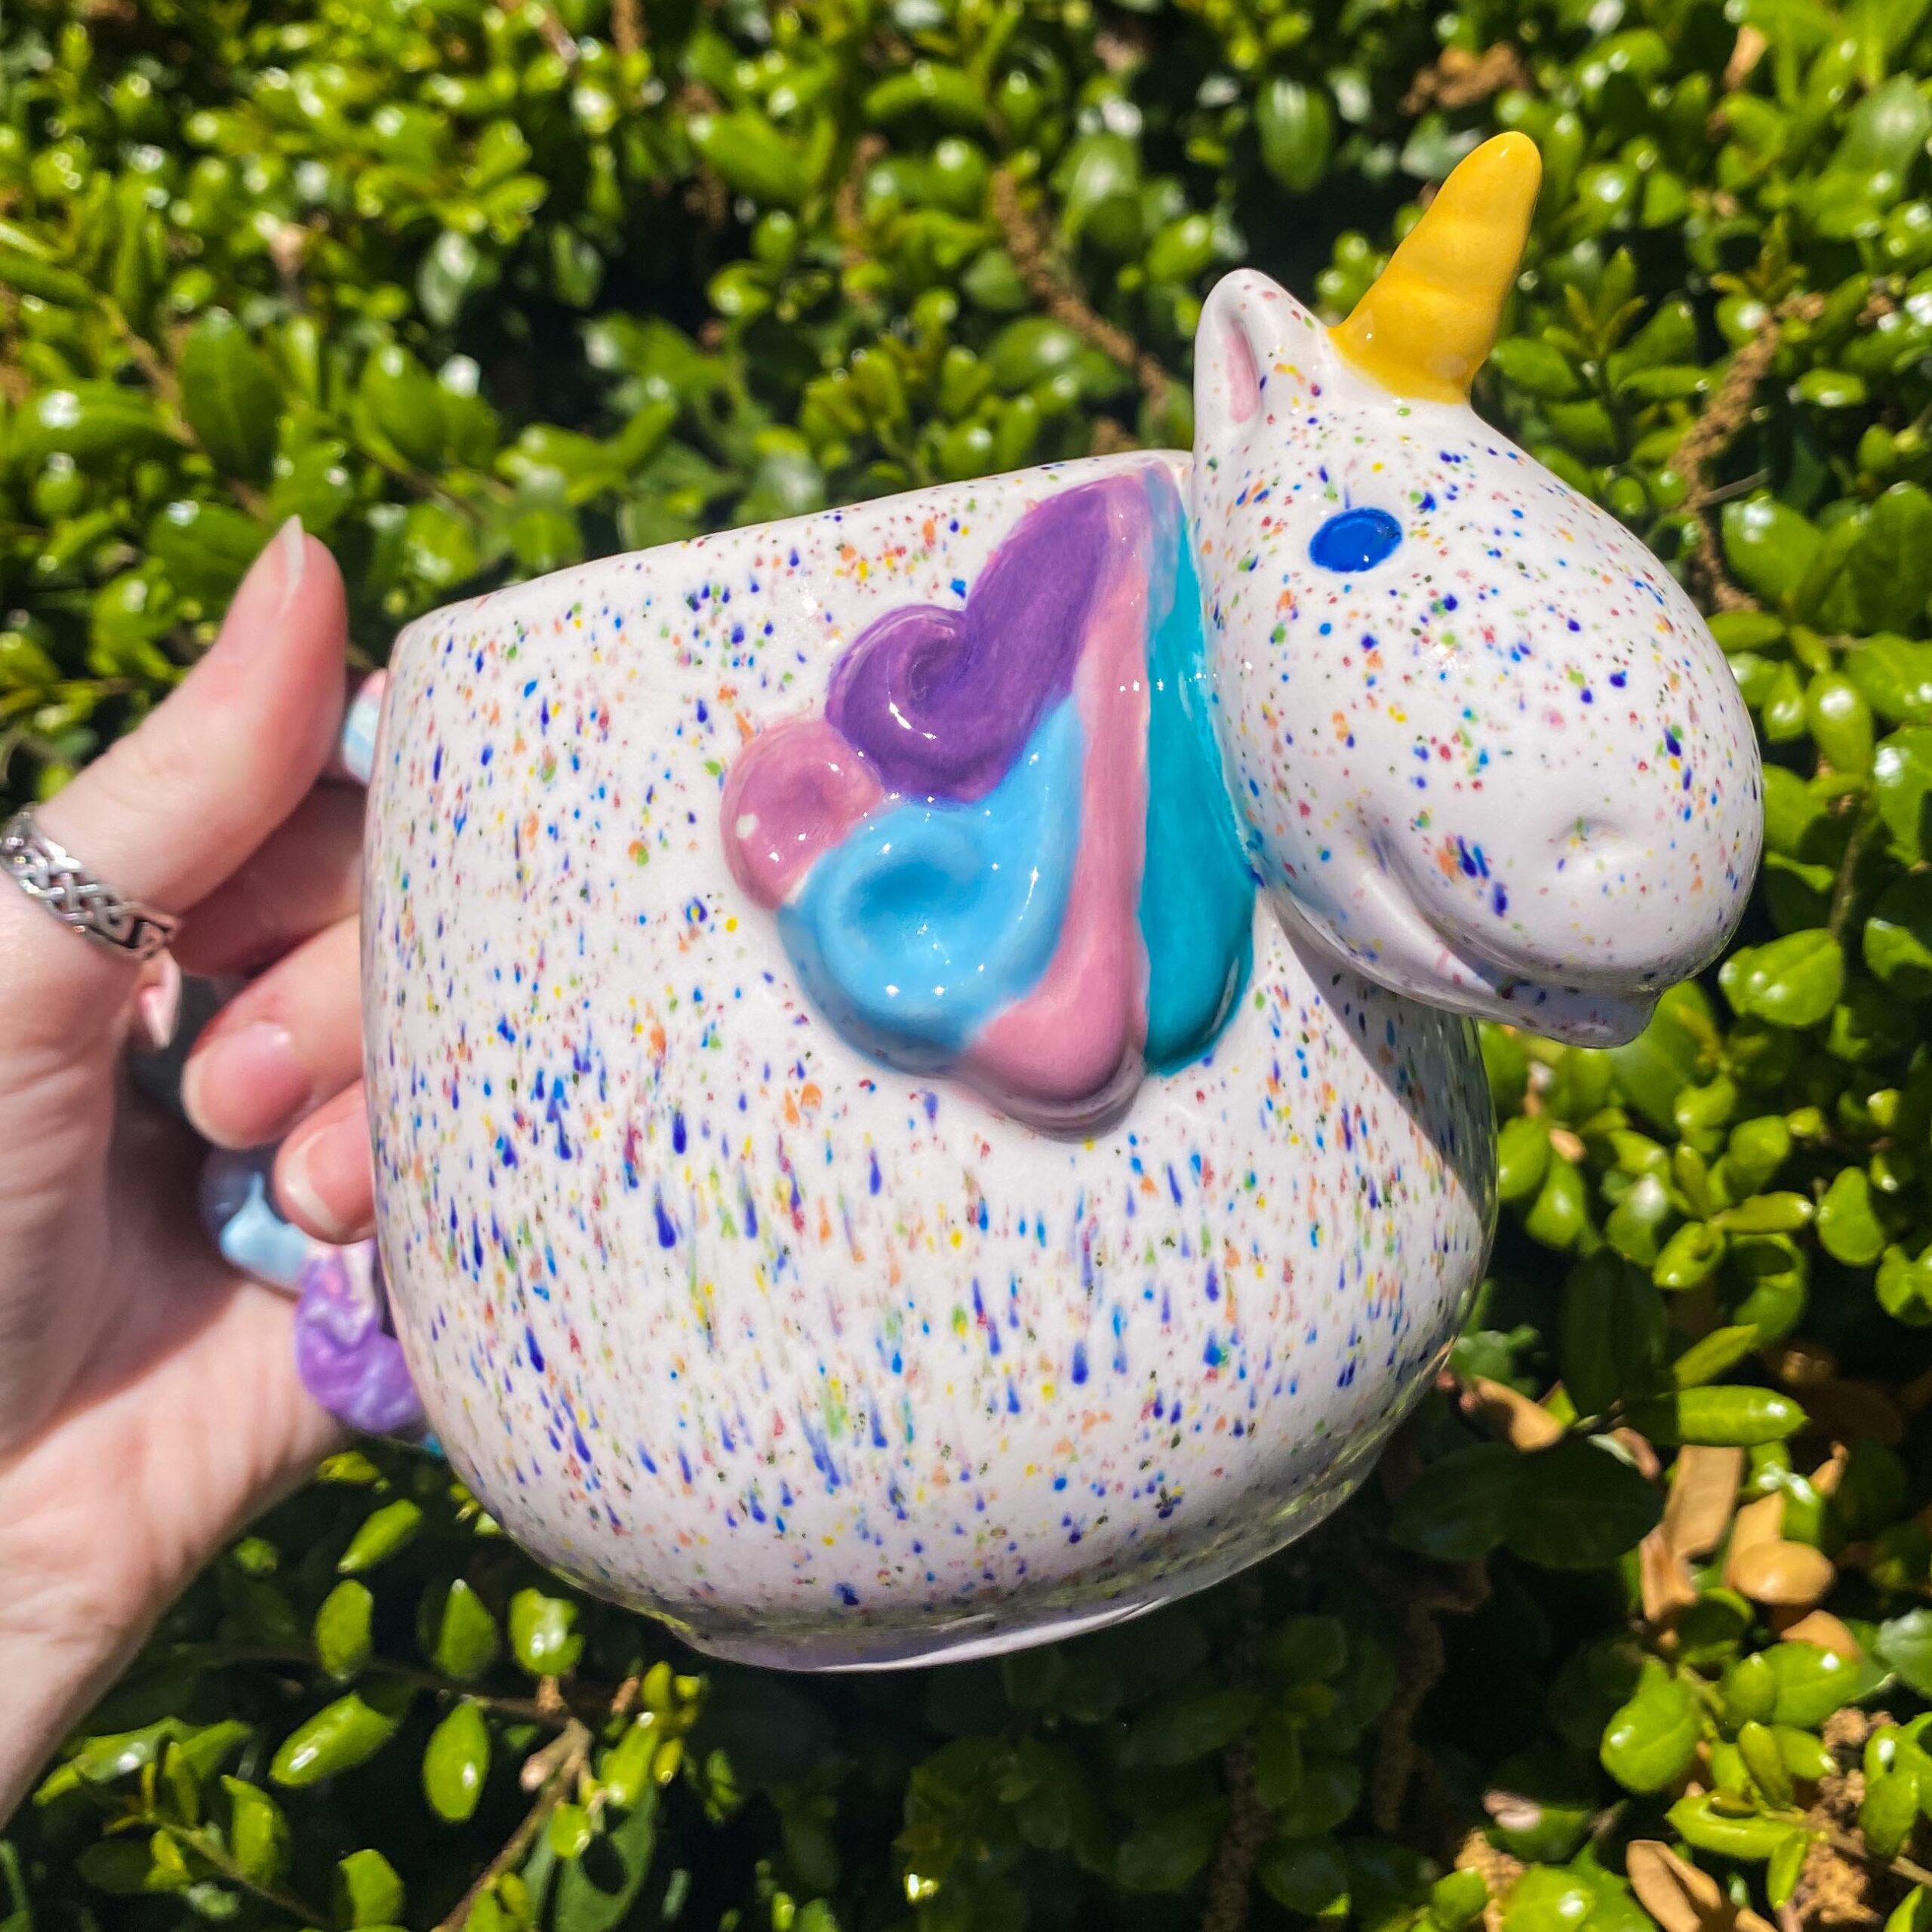 A person holding a unicorn shaped container in their hand.